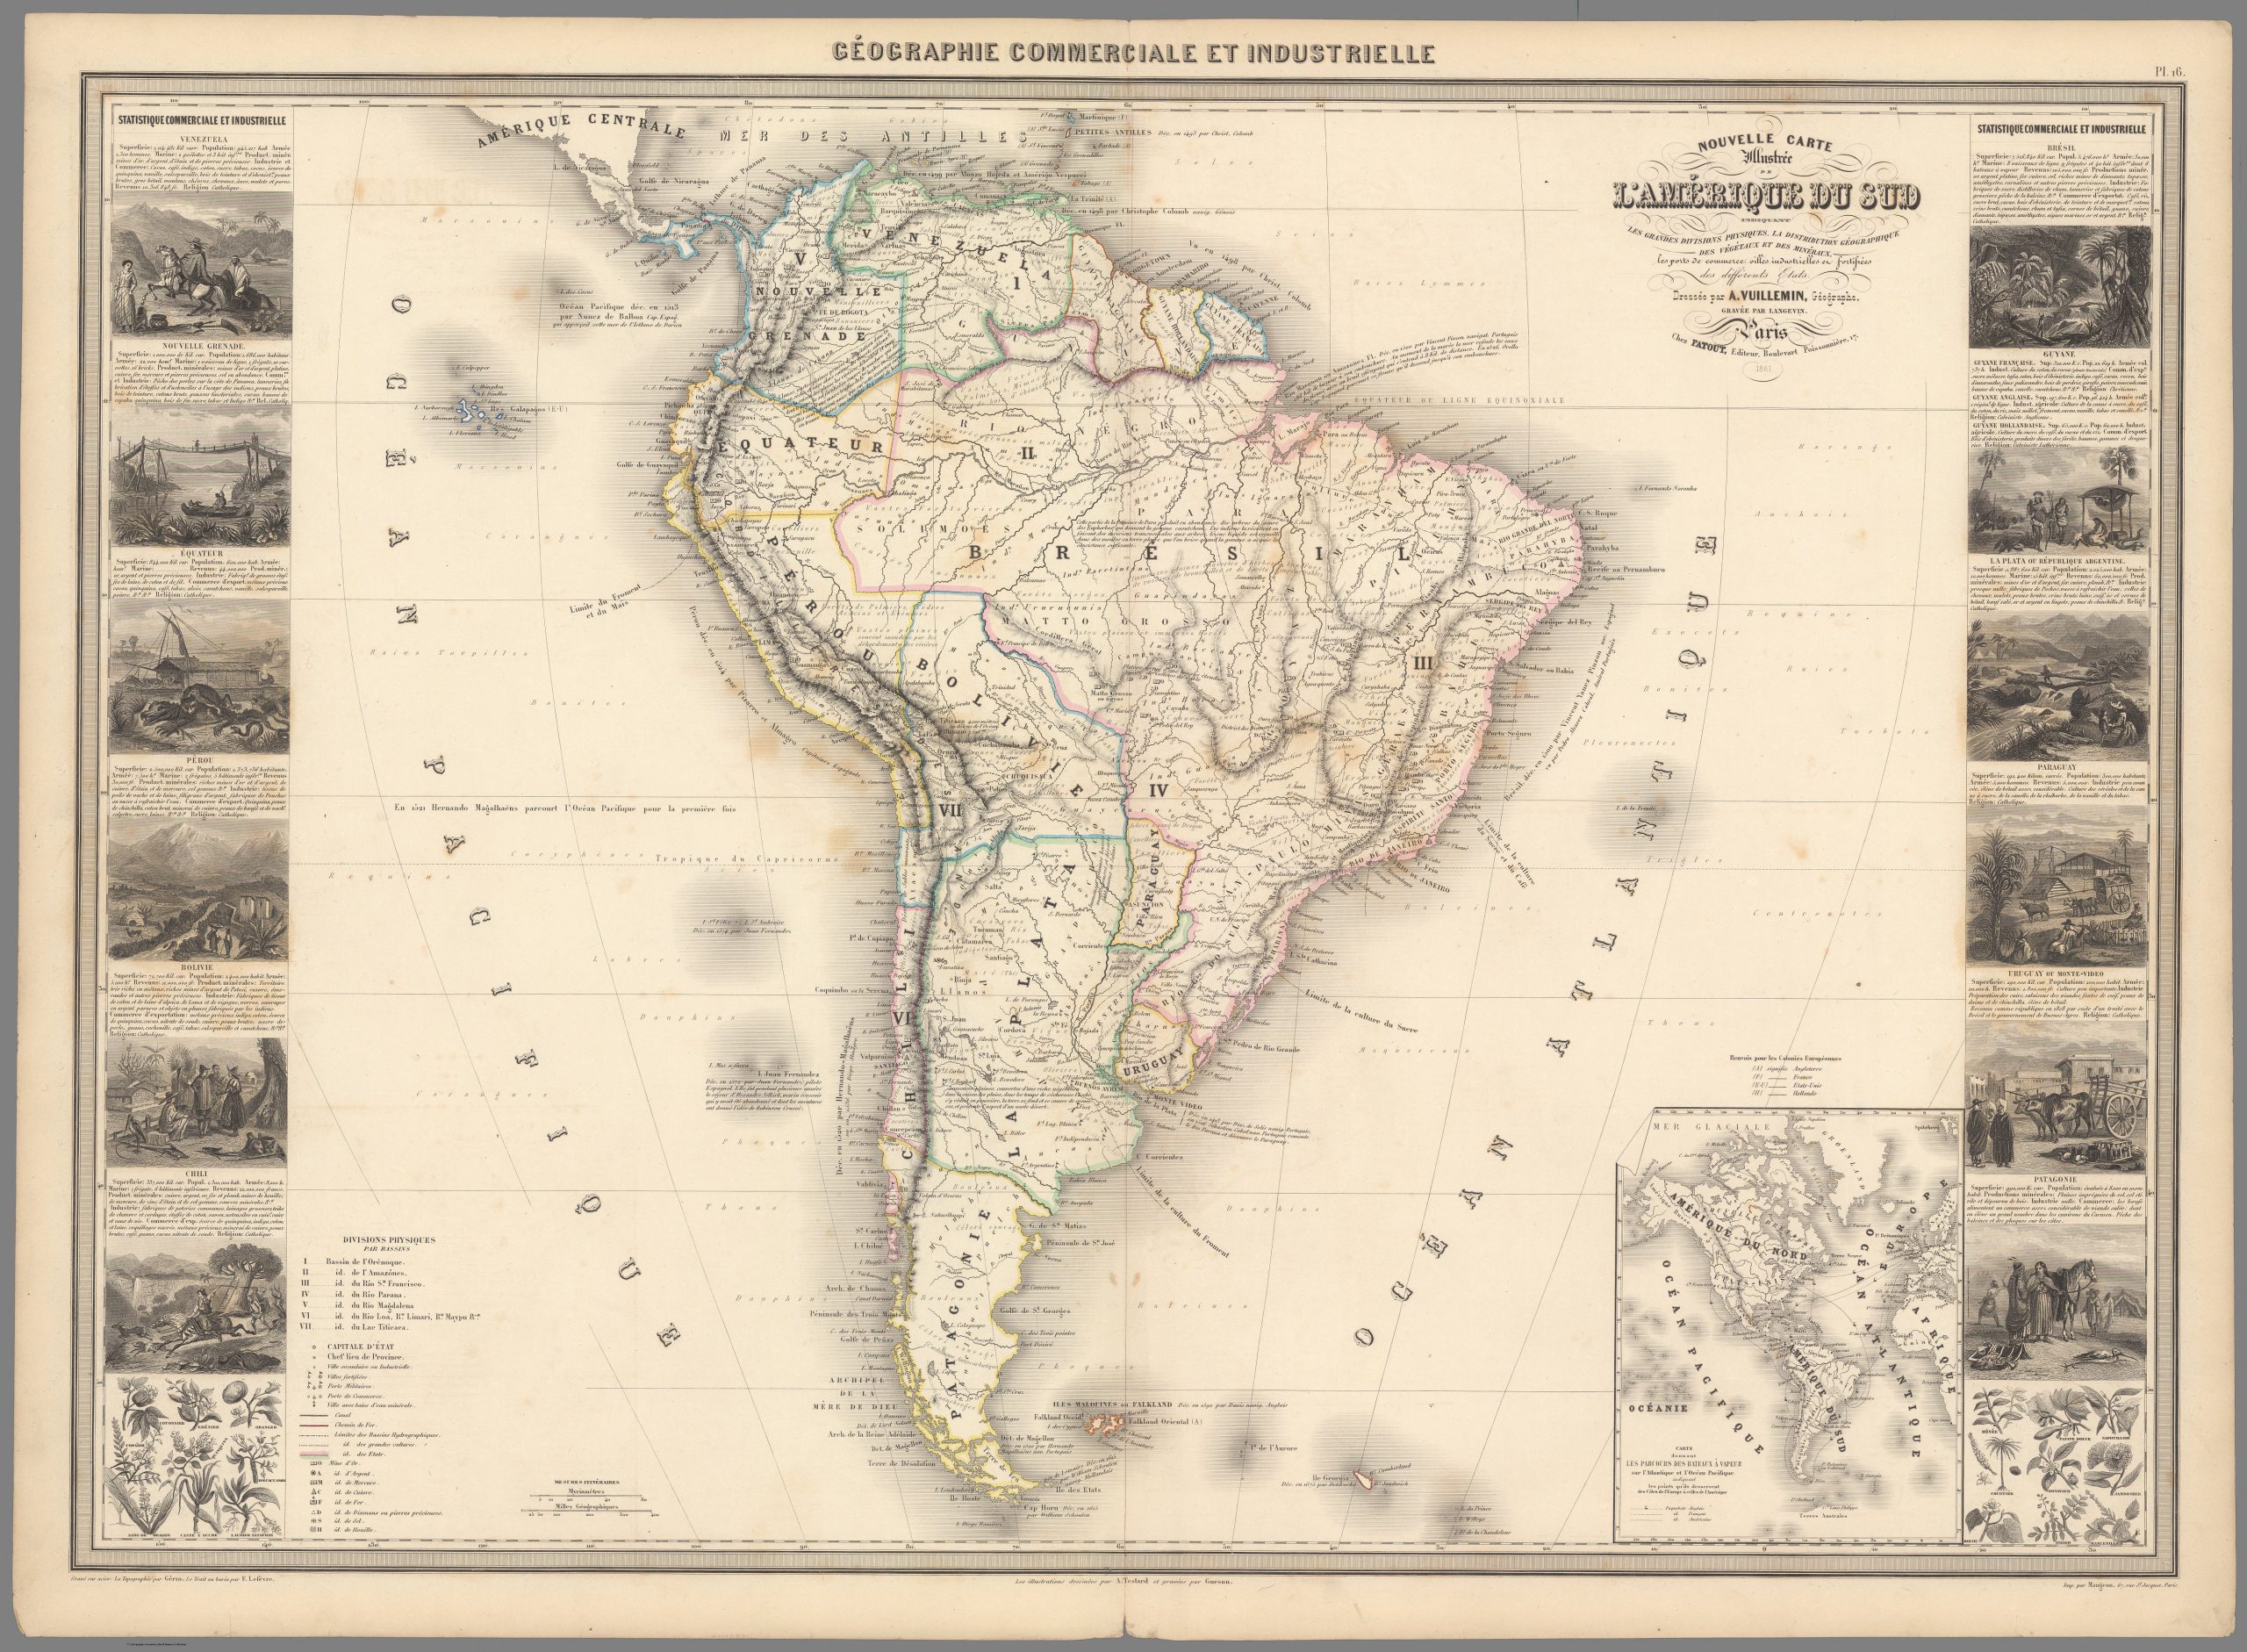 Power, Politics and Maps: Role of Cartography in State-Making in the Southern Cone during the 19th Century